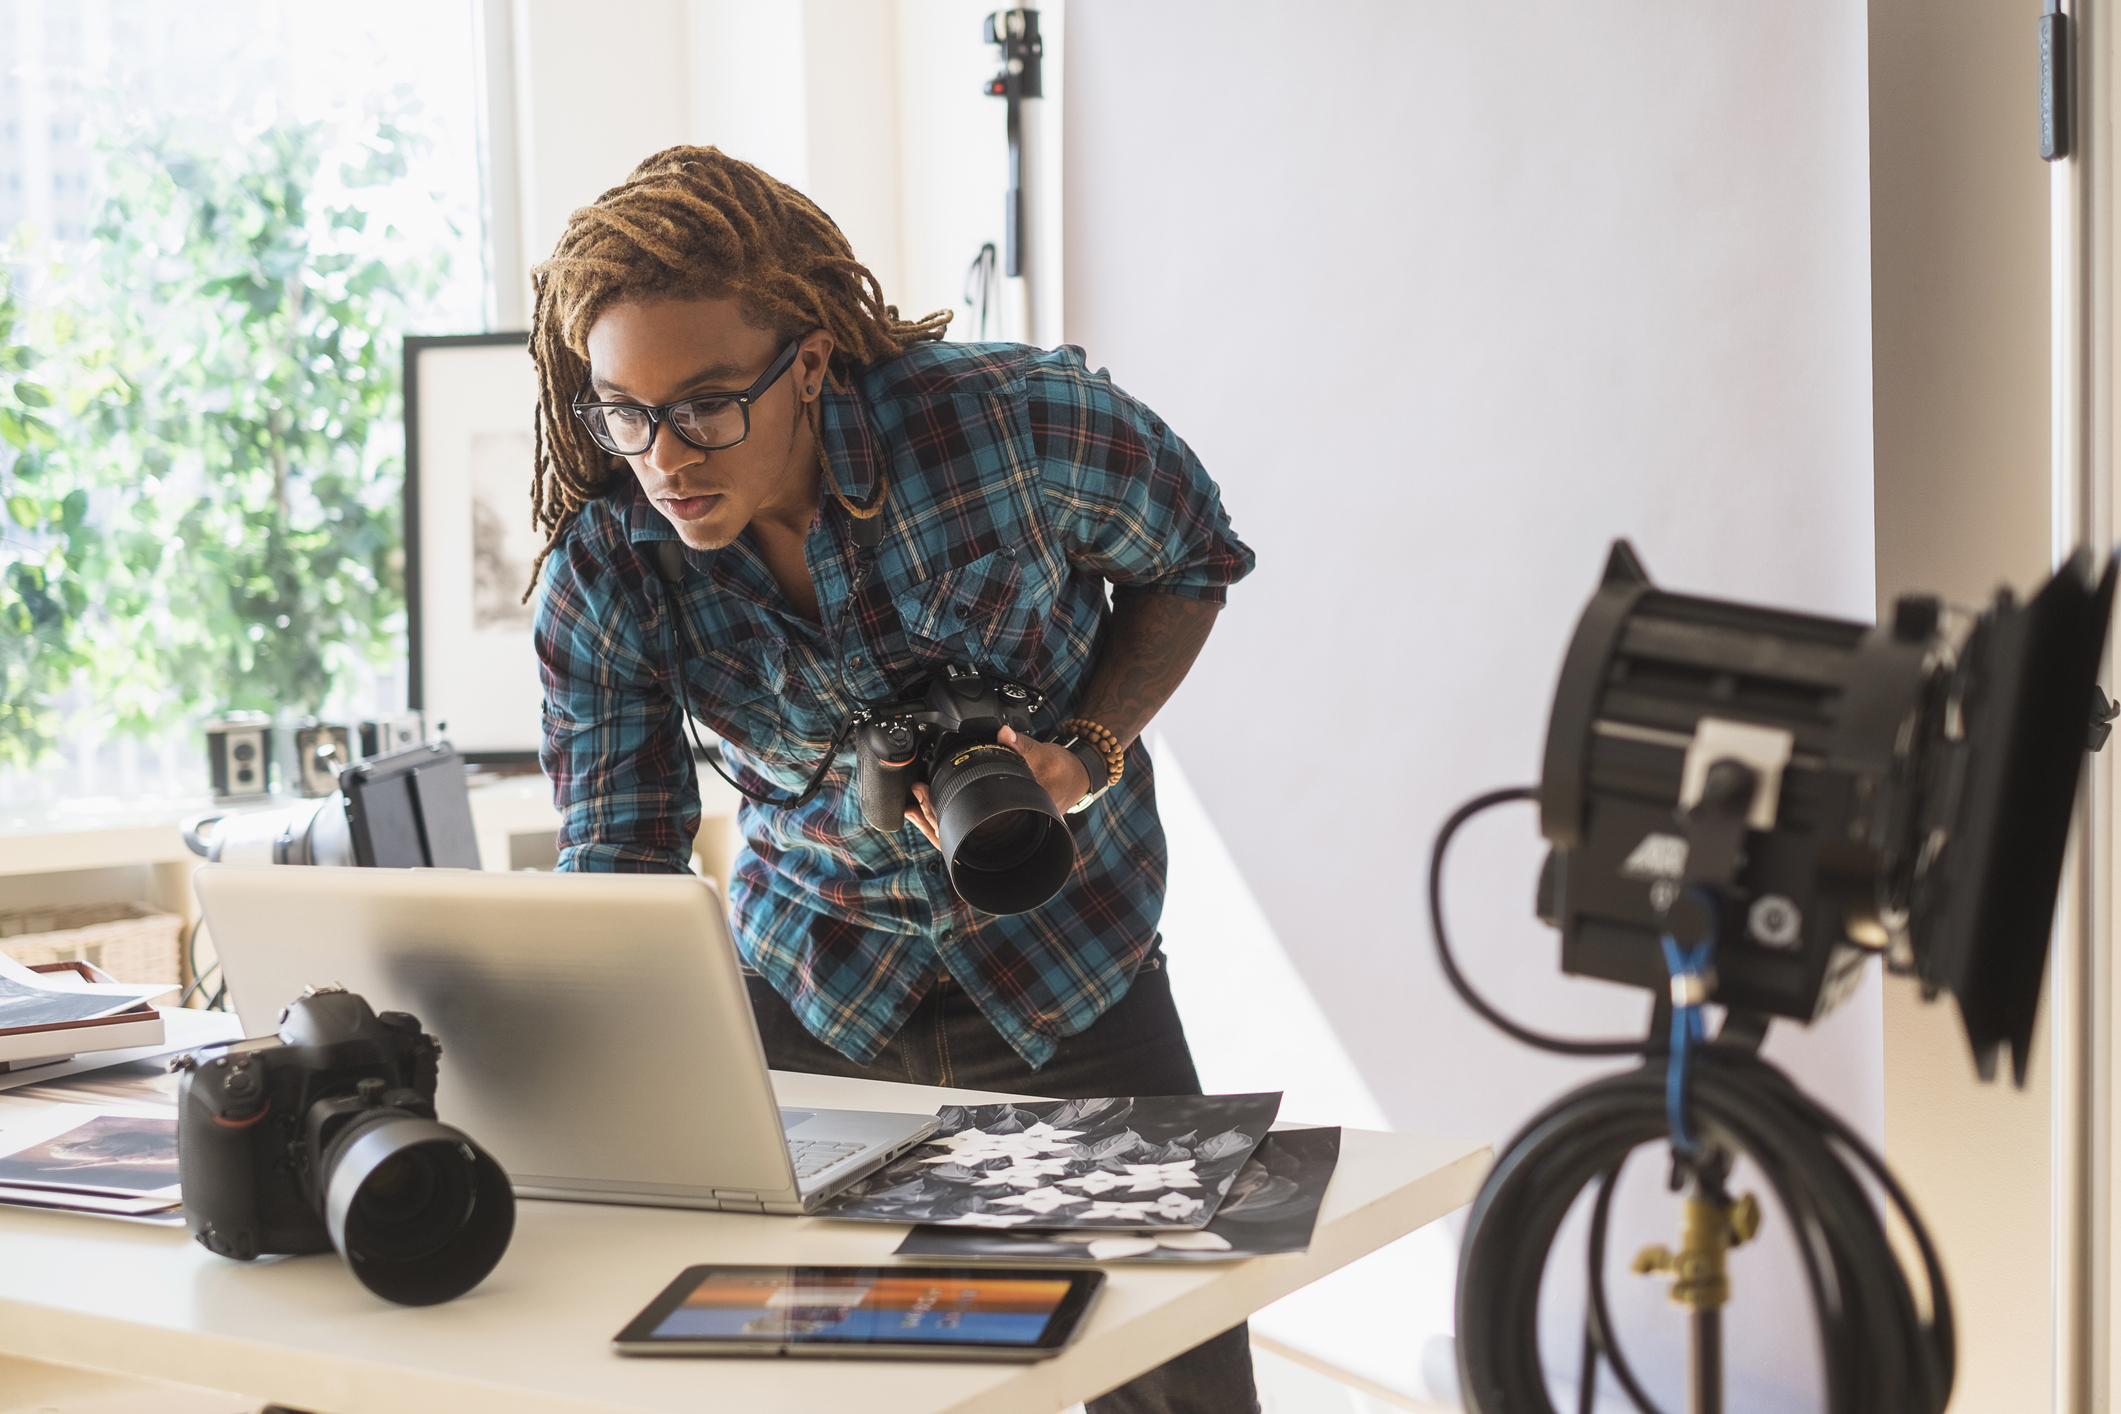 How to Start a Photography Business - NerdWallet